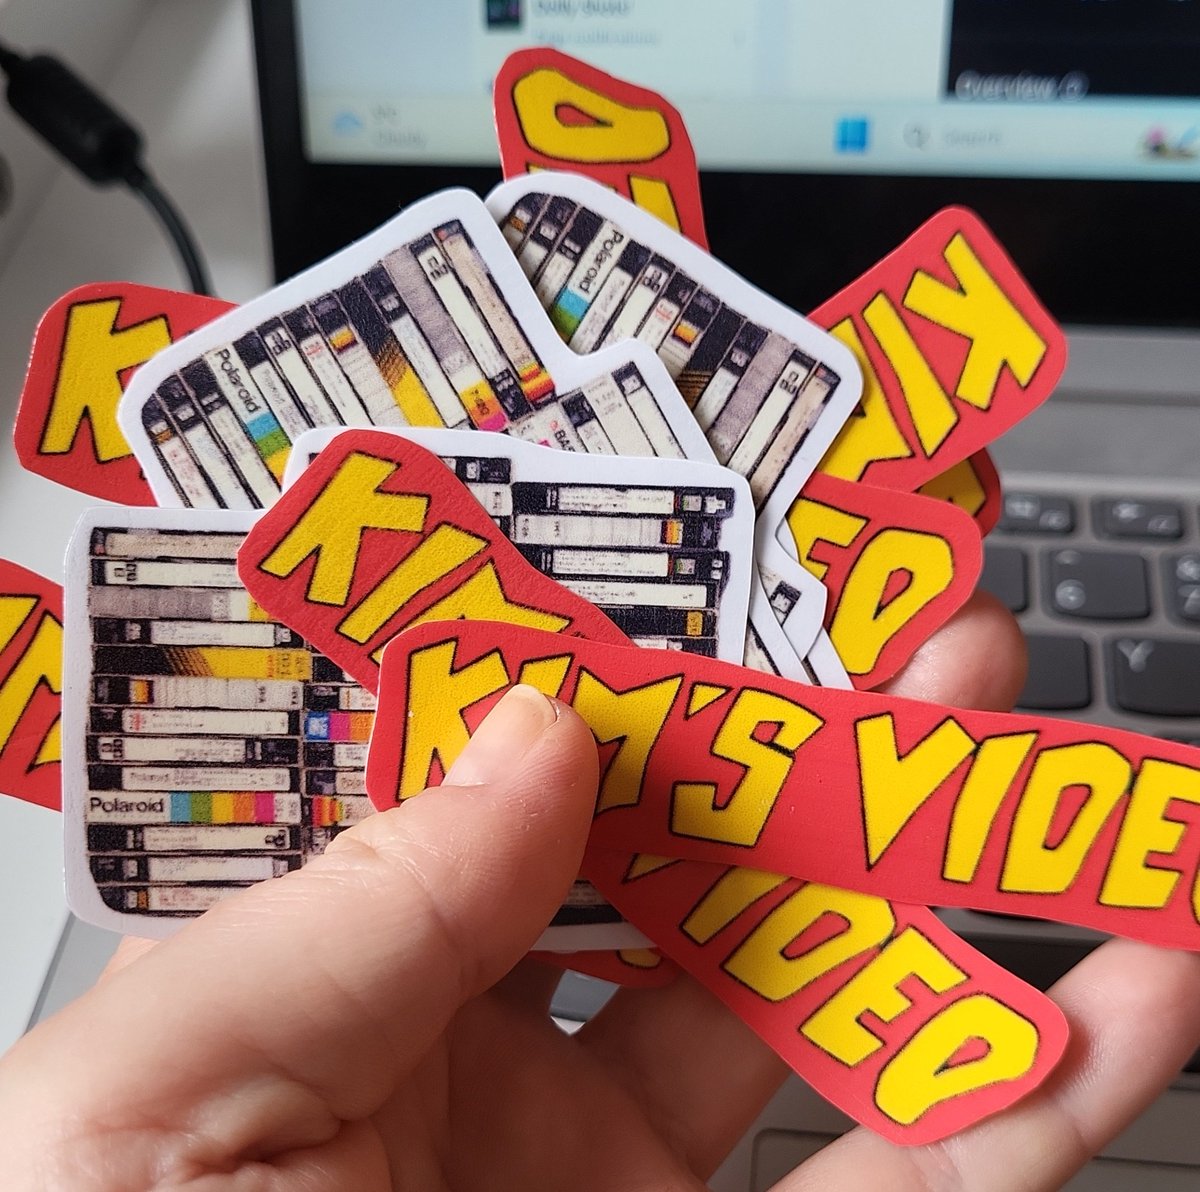 Don't forget to bring a DVD or video to swap in our mystery box during our screening of Kim's Video this evening! ⤵️ 6pm // @CameoCinema + director's Q&A Also... we have STICKERZ!!! 🙌 Bit.ly/kimsvideoatcam…